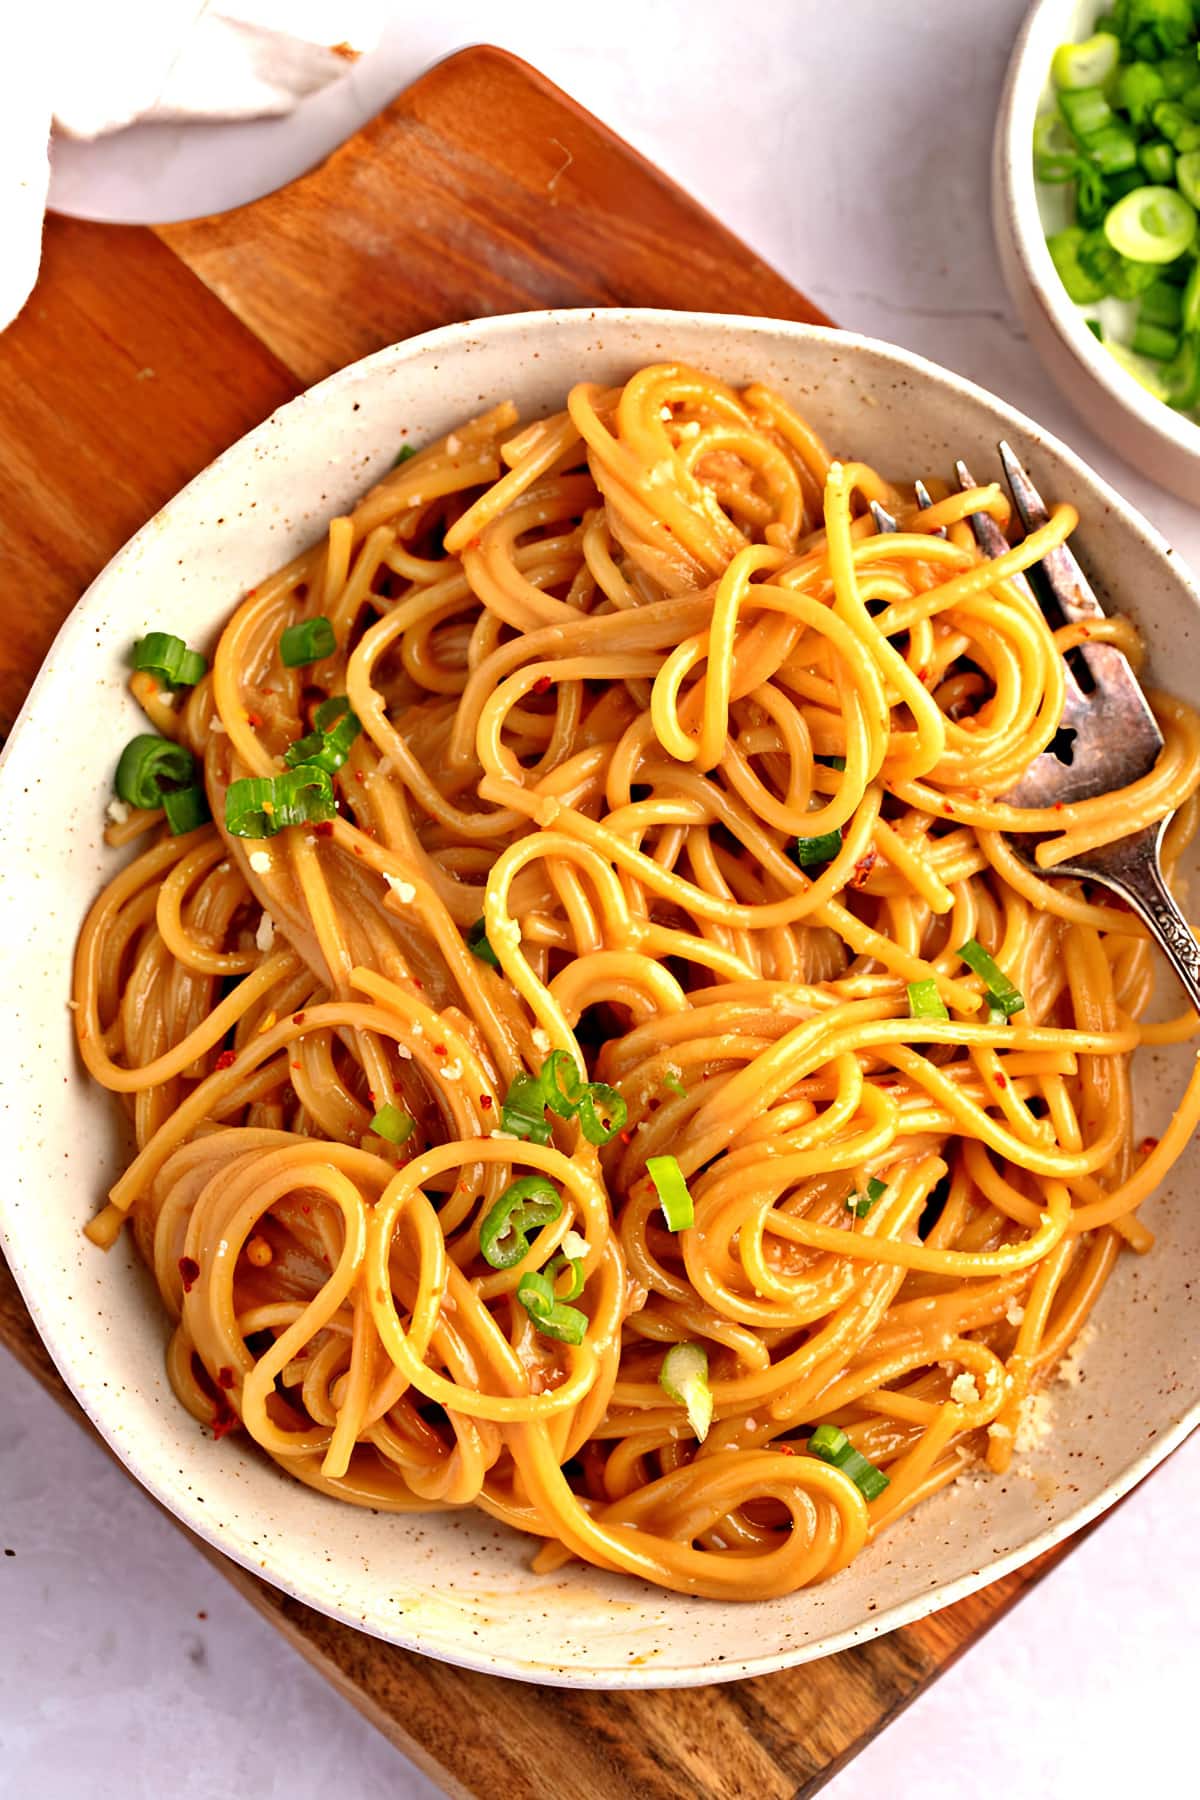 Garlic noodles with spices, spaghetti and cheese